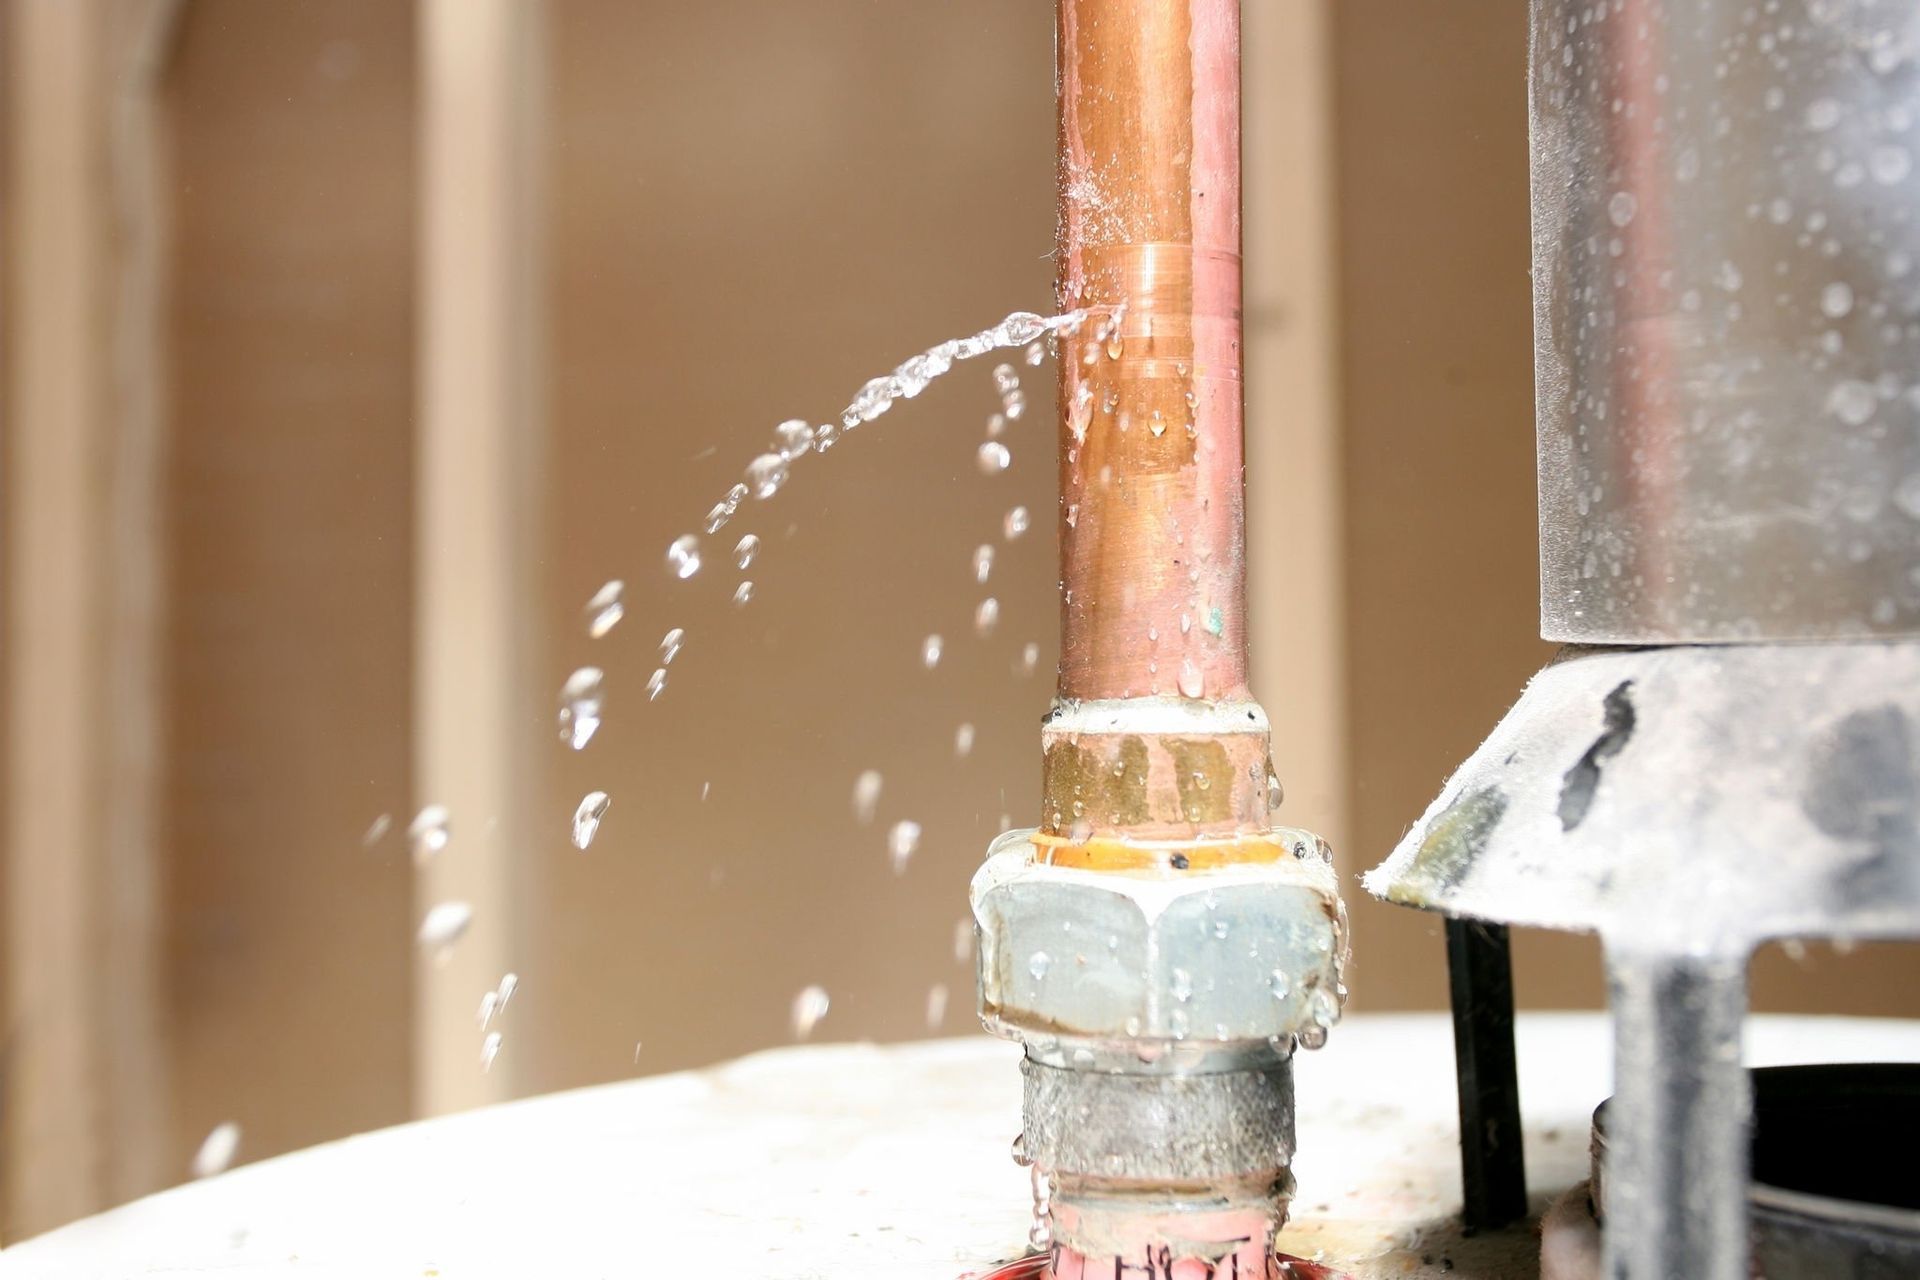 Tier One Plumbing solutions offers Water Line Replacement servicing TN